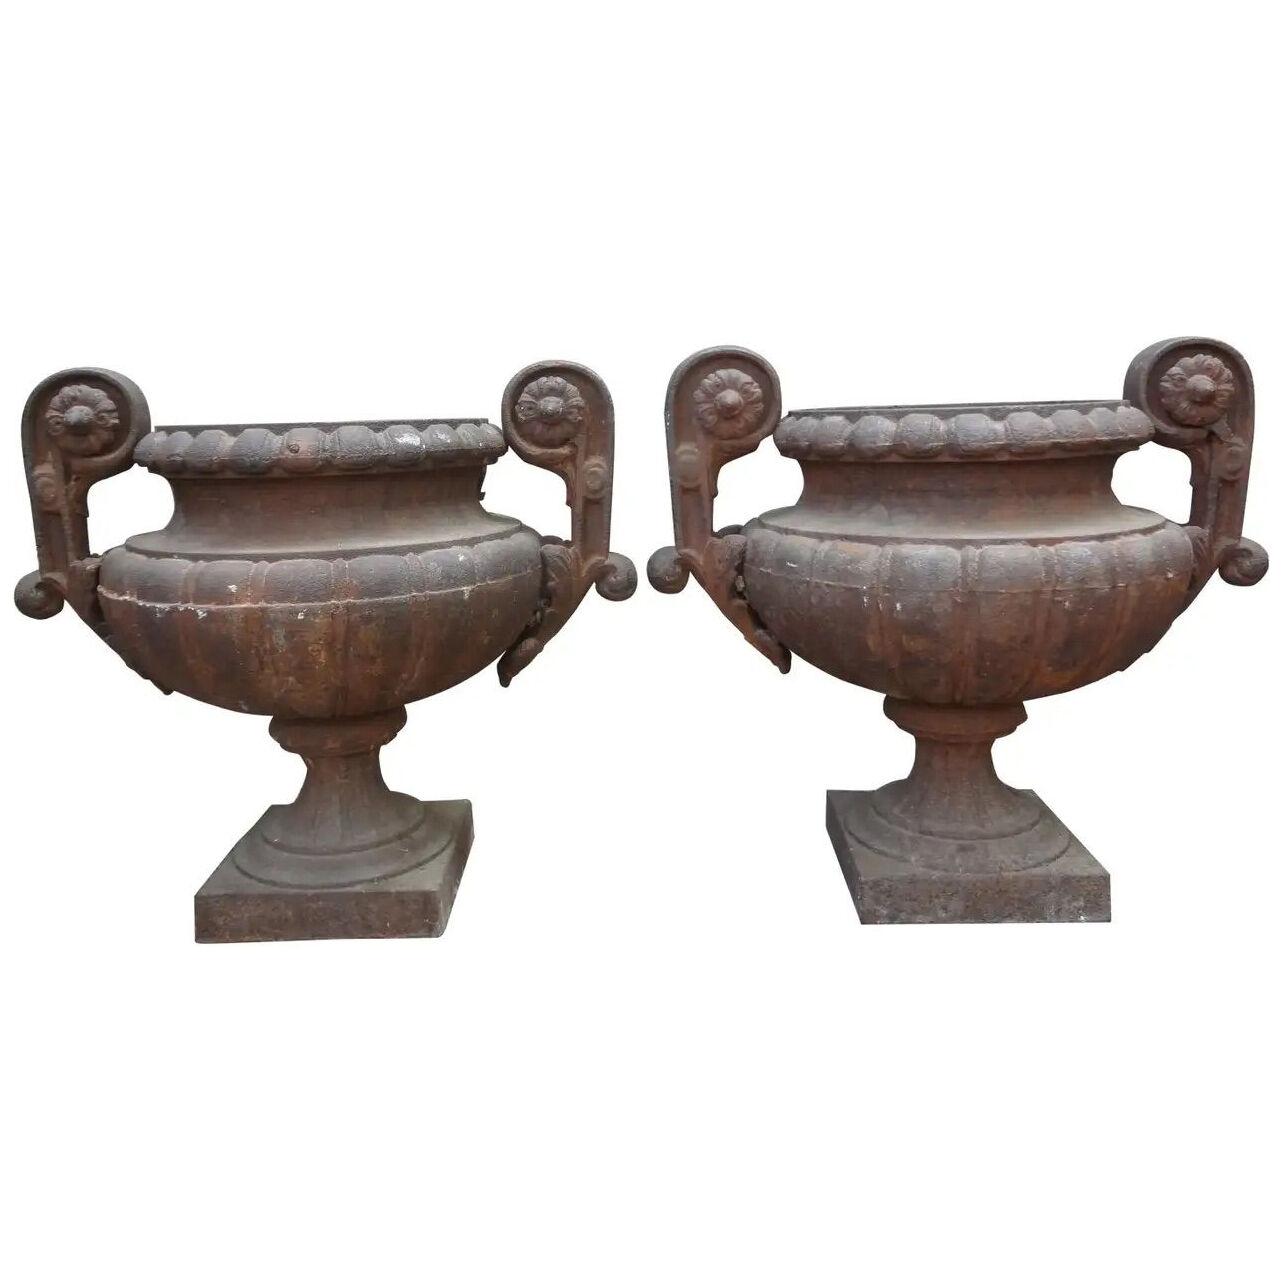 Pair of 19th Century French Cast Iron Garden Urns with Handles